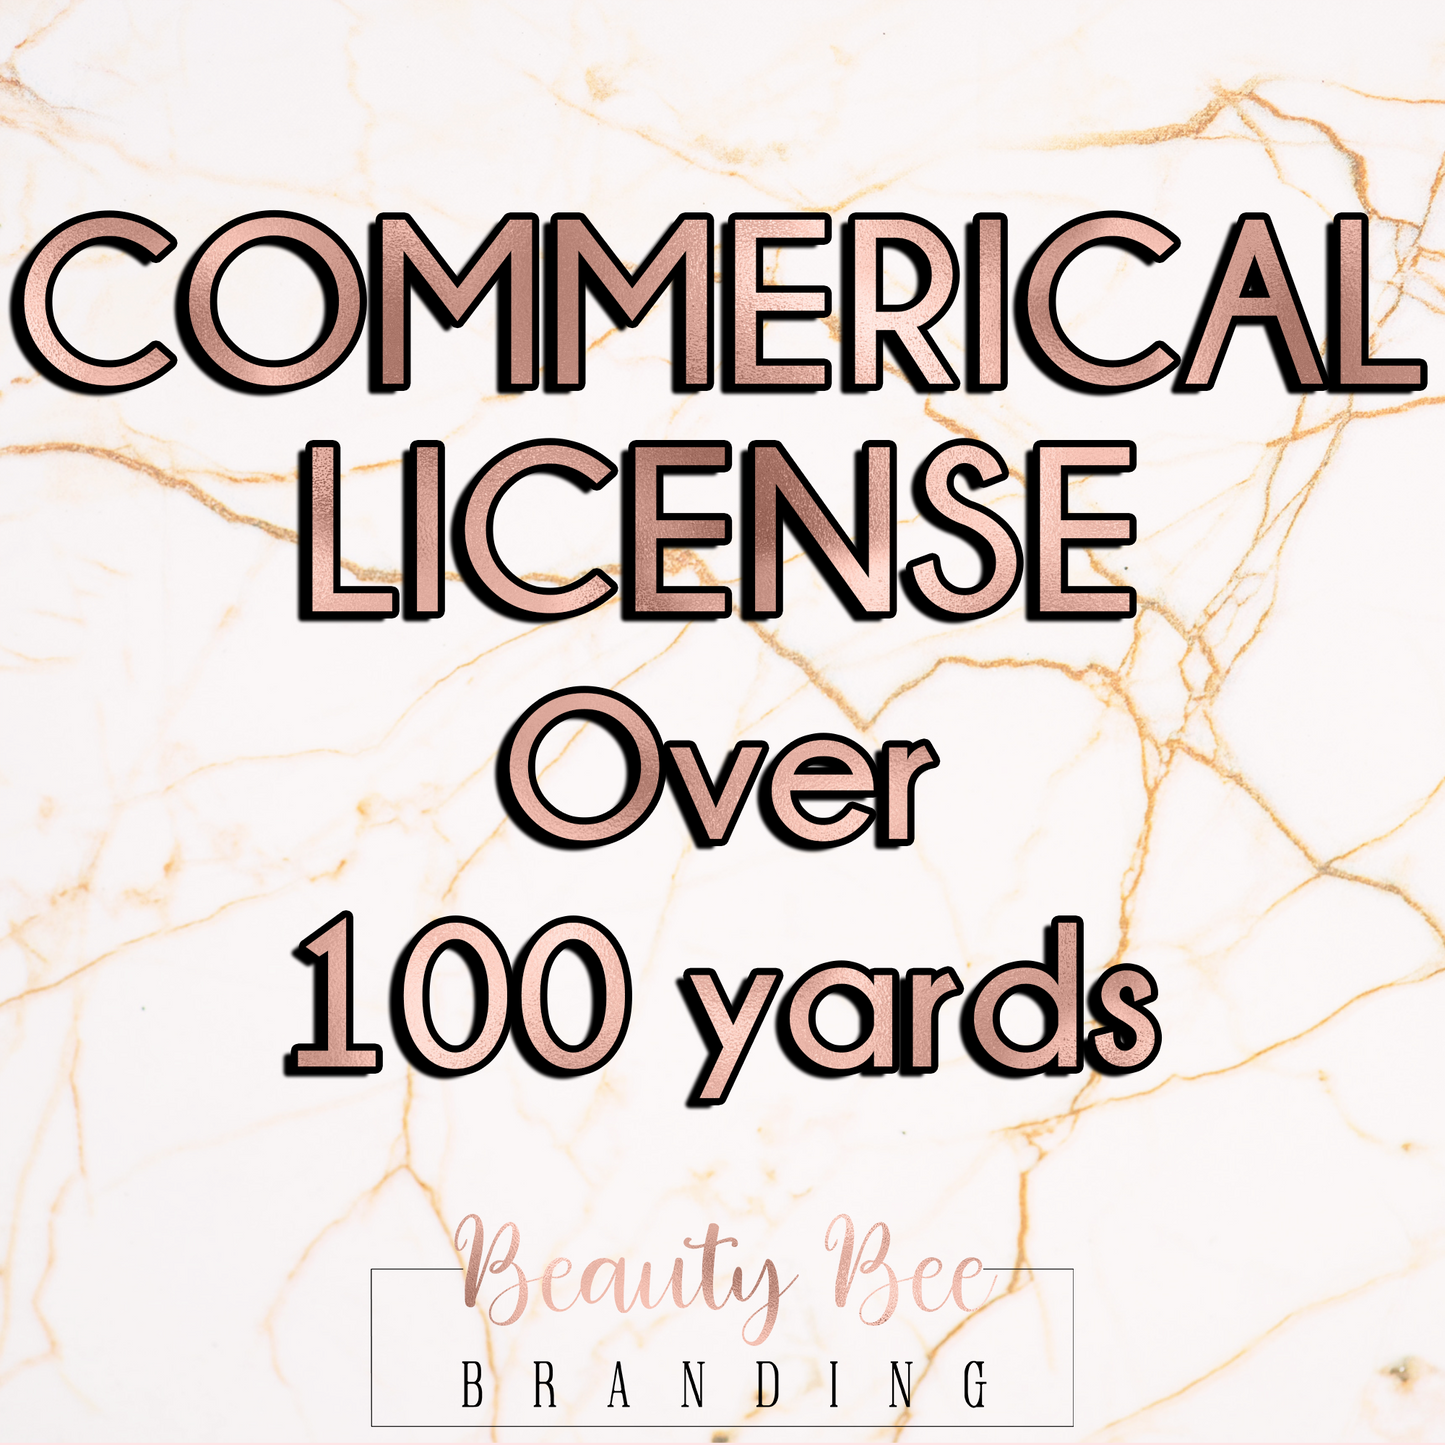 ADD ON Extended Commercial License Over 100 Yards